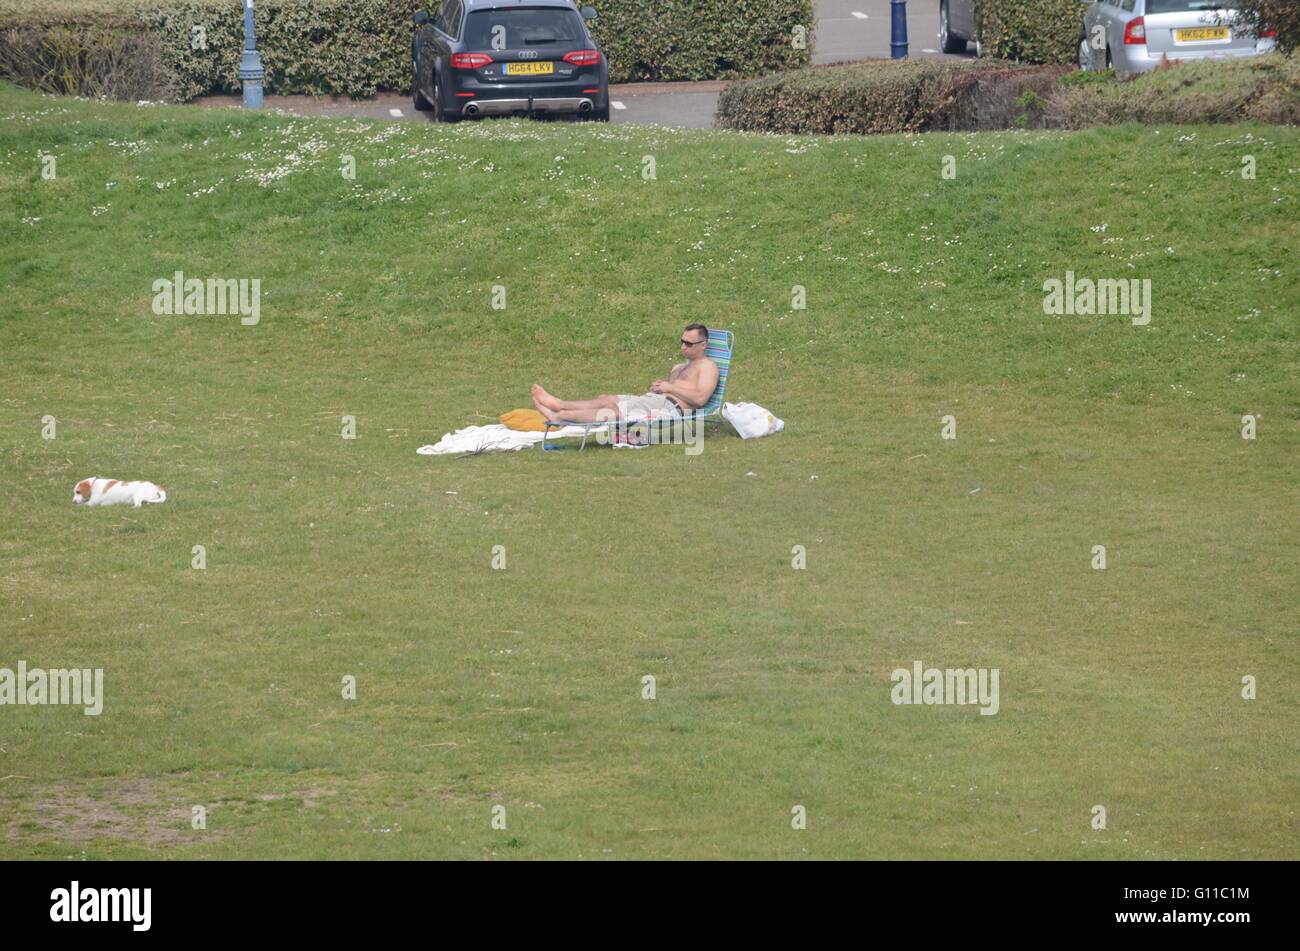 Portsmouth, UK. 7th May 2016. A man sunbathes with his dog on an iconic deckchair. Credit: Marc Ward/Alamy Live News Stock Photo